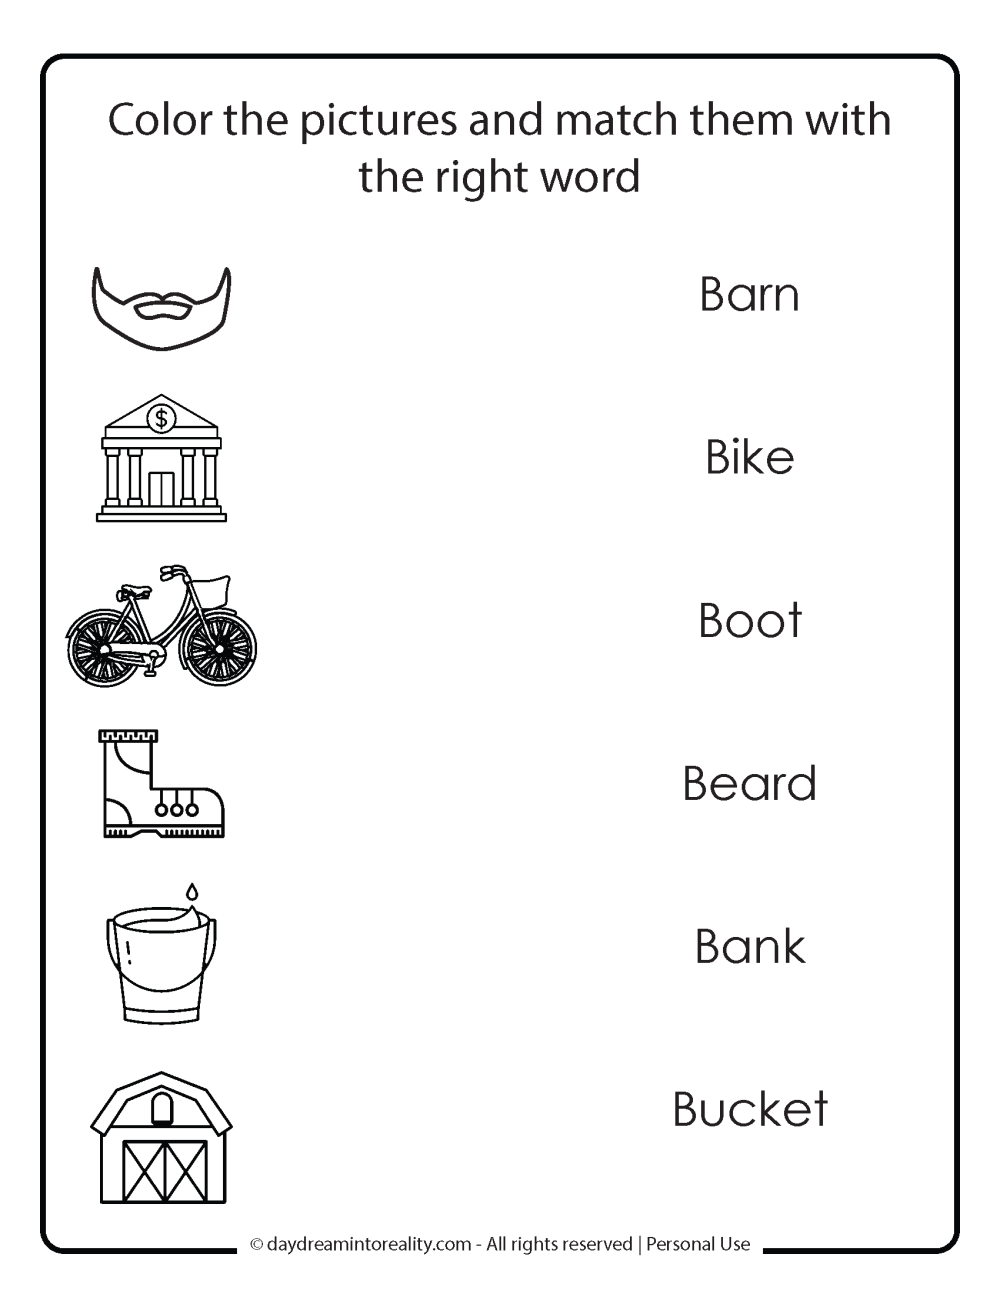 color and match words that start with B free printable worksheet